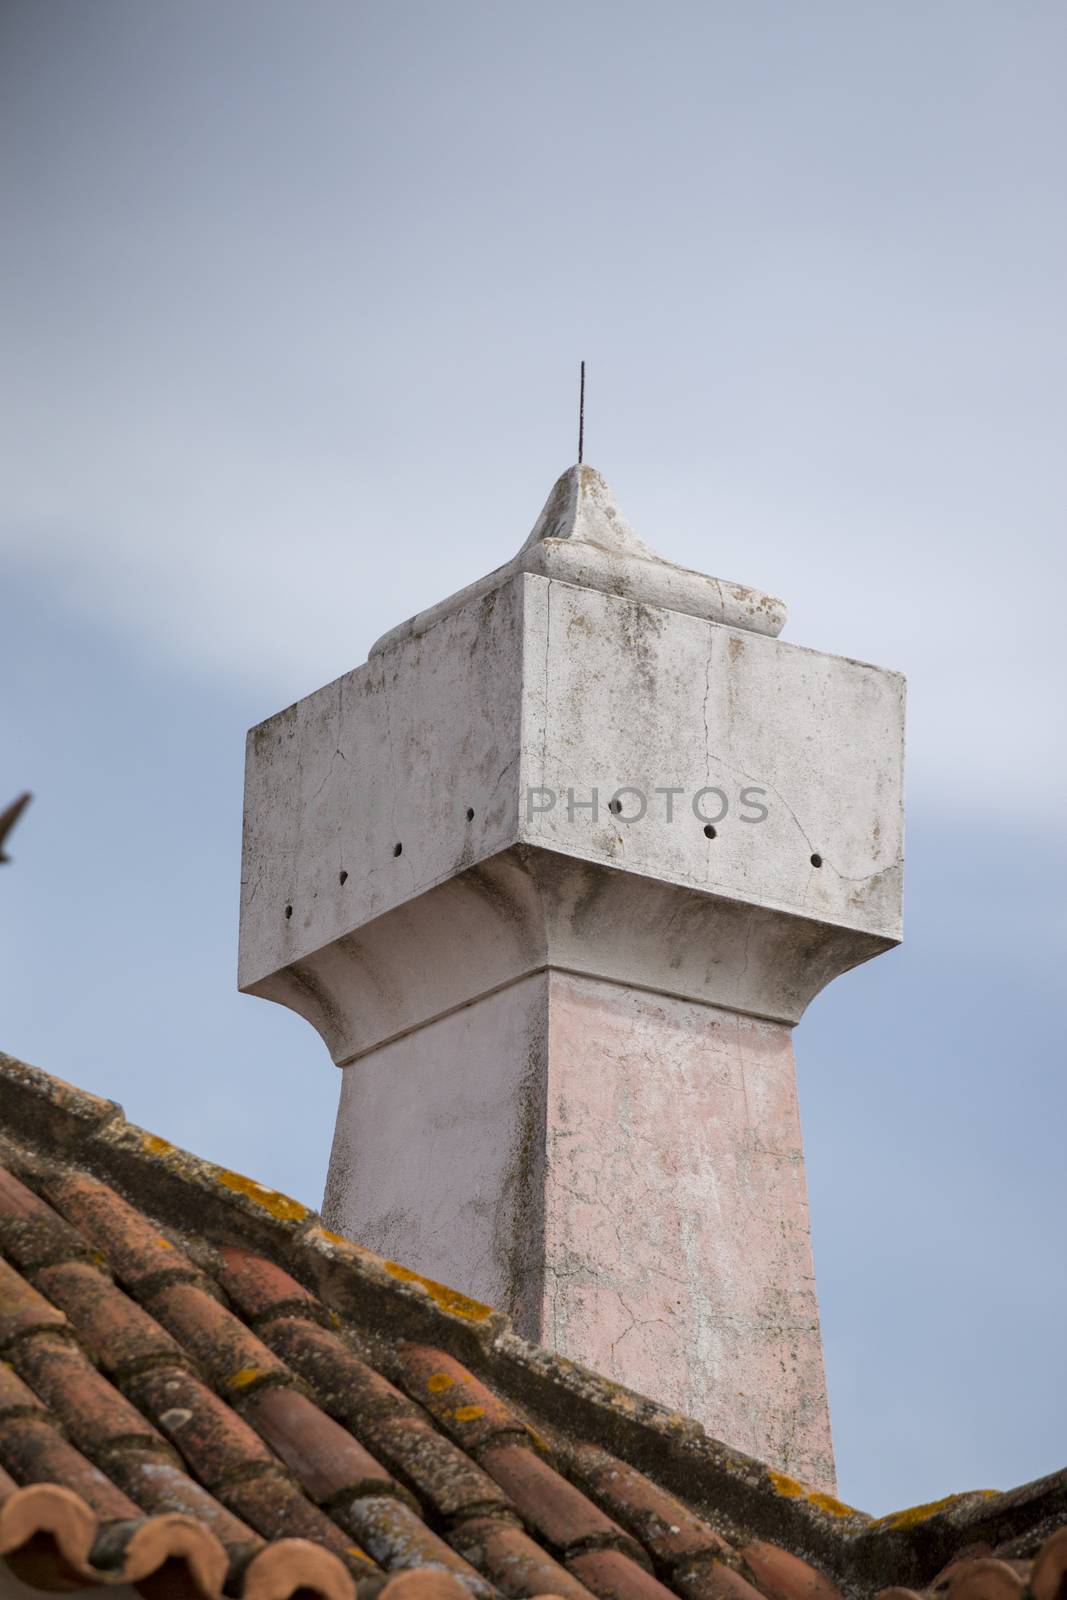 Portuguese chimney on a red tile roof by membio